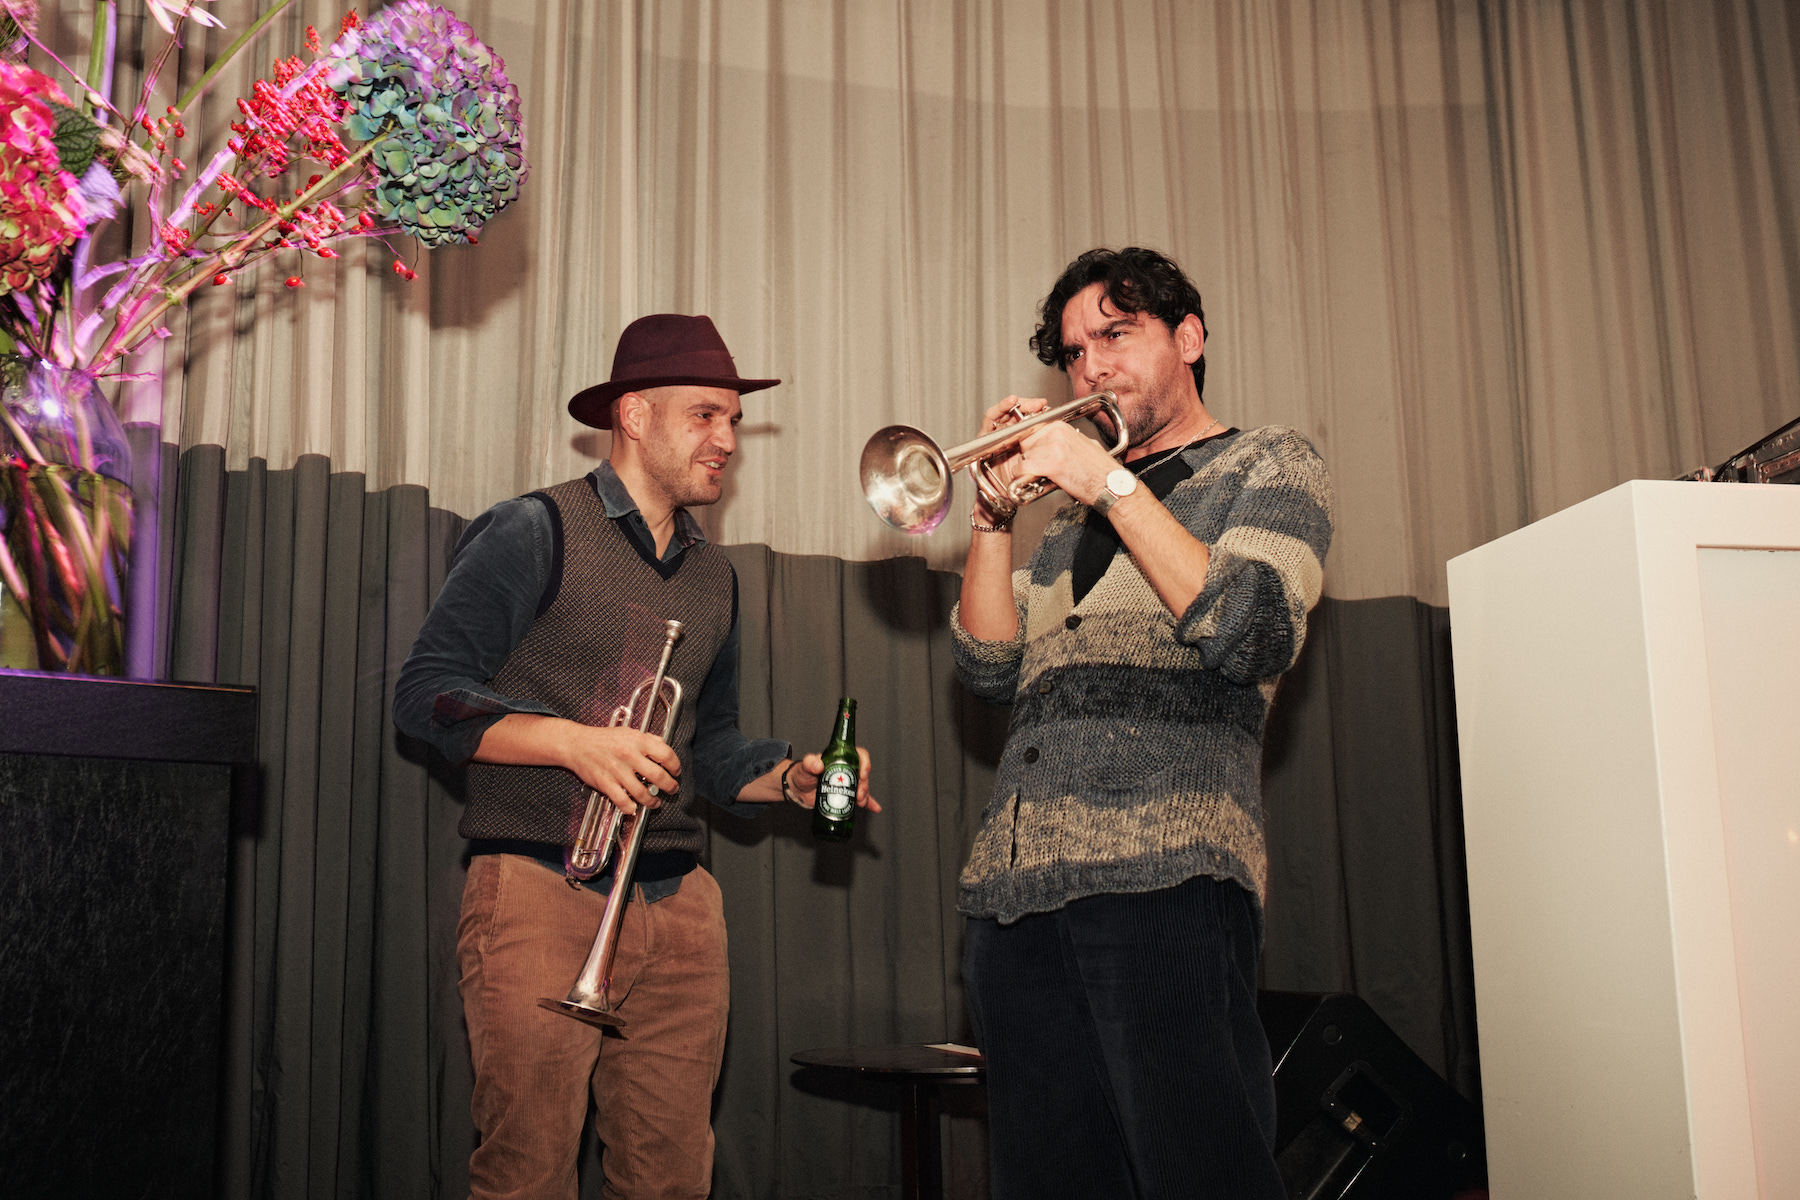 A performance by trumpet players Philipp Hutter and Miro Petkov marking the Companions’ one-year anniversary (photo: Milagro Elstak)